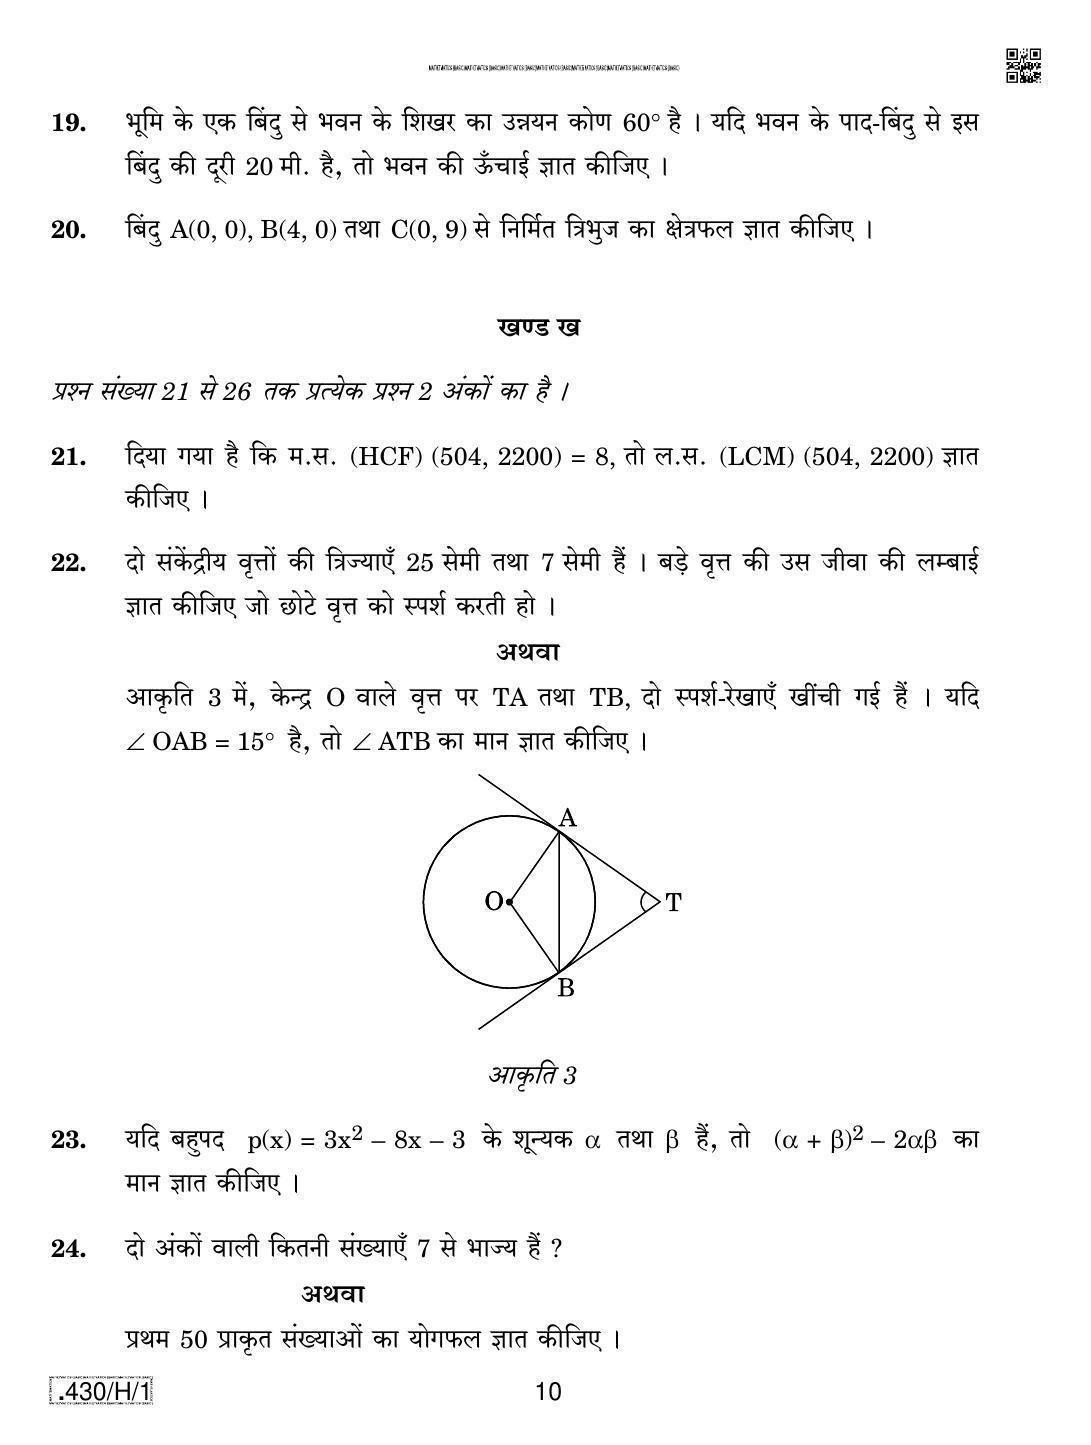 CBSE Class 10 430-C-1 - Maths (Basic) 2020 Compartment Question Paper - Page 10